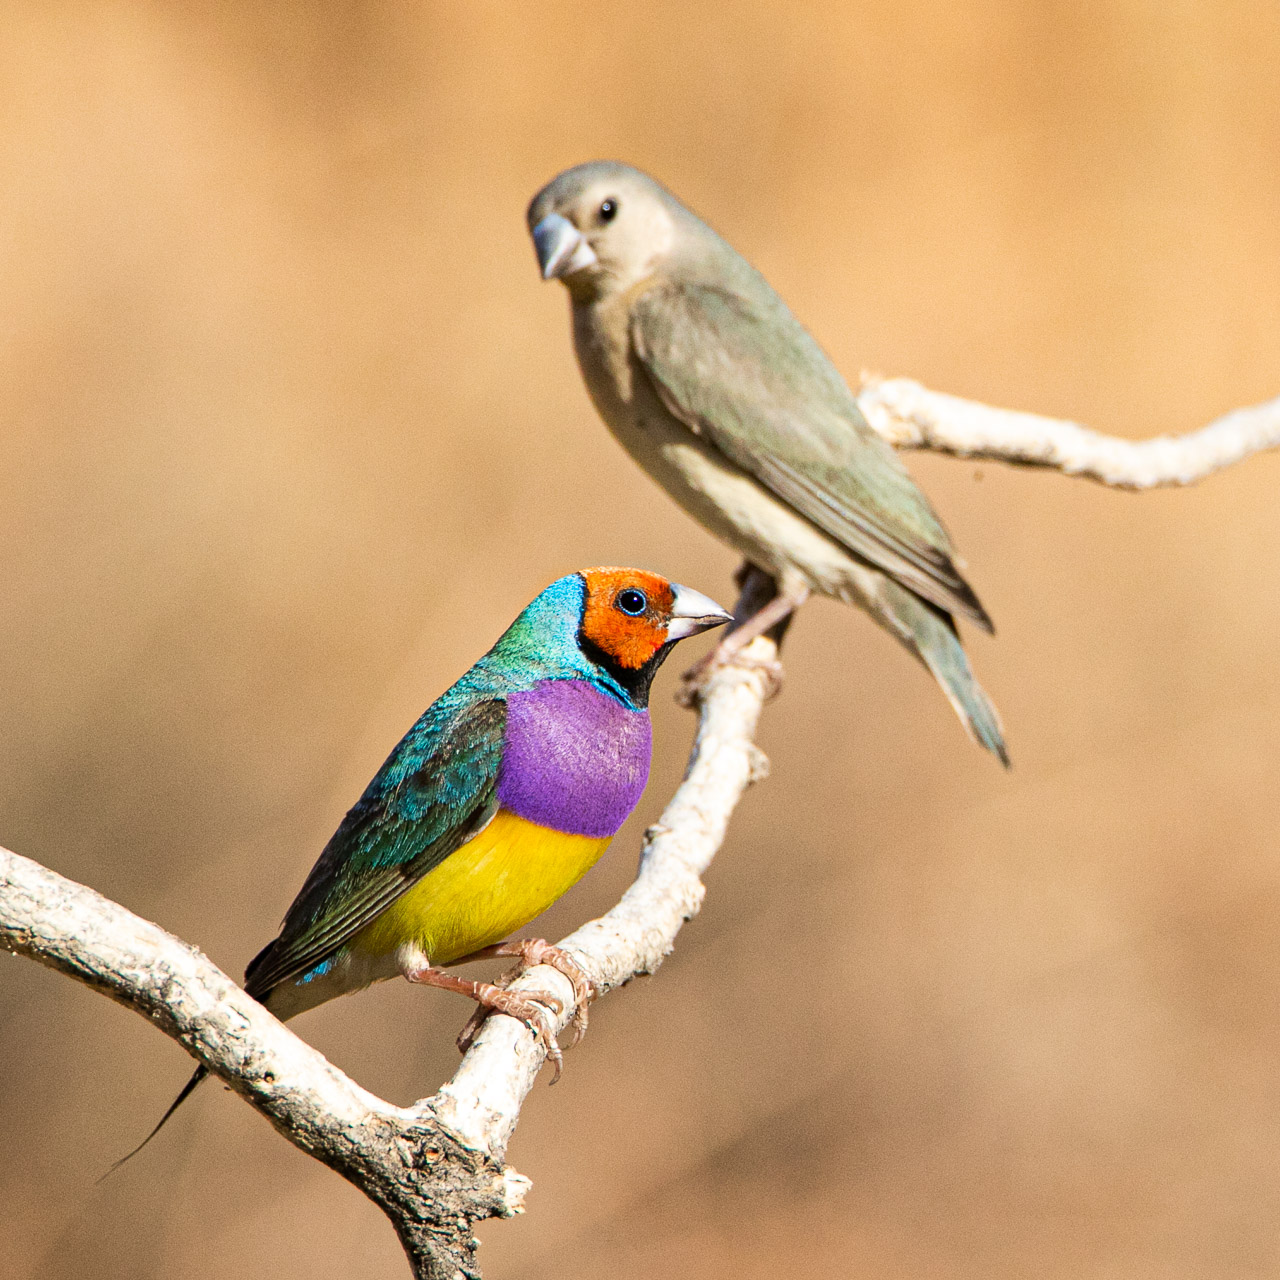 Adult and juvenile gouldian finches in Wyndham WA